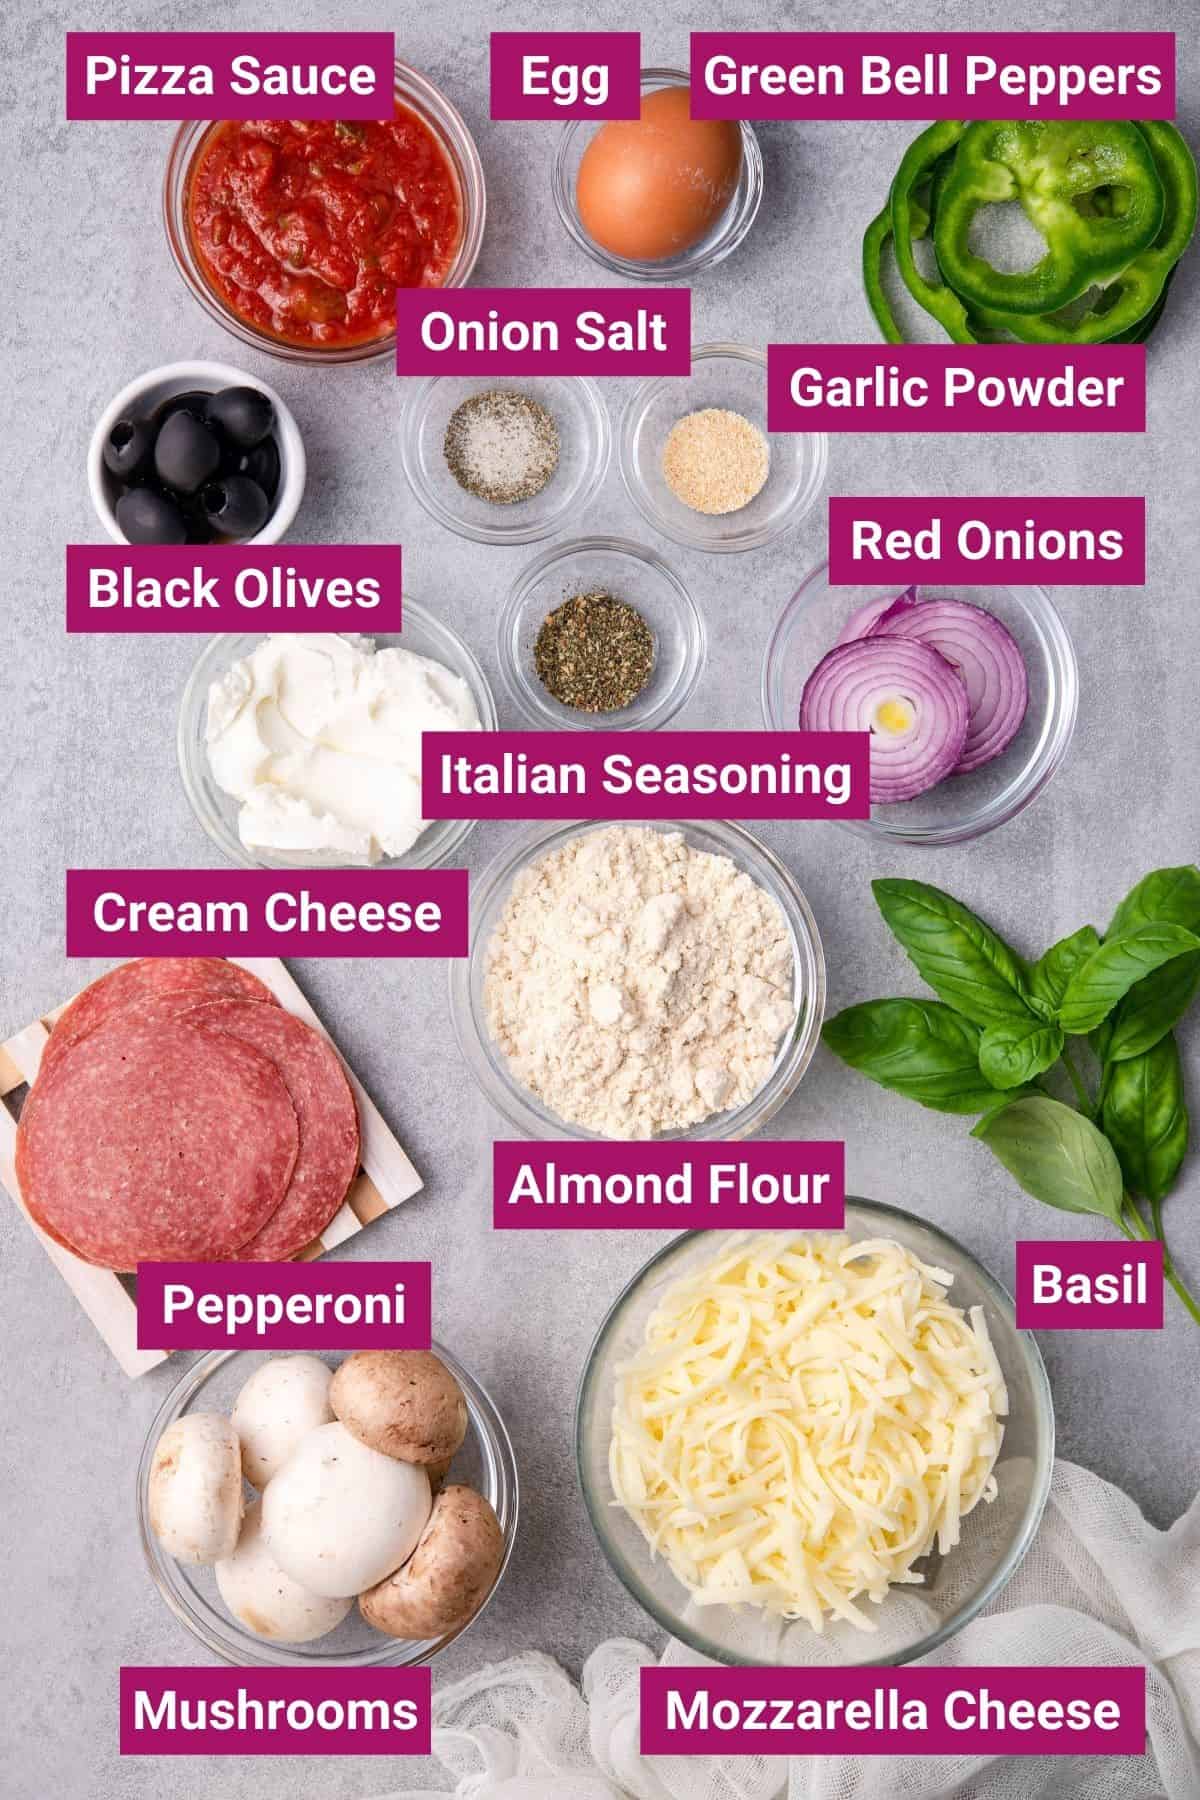 ingredients of Fathead Pizza Dough on separate bowls